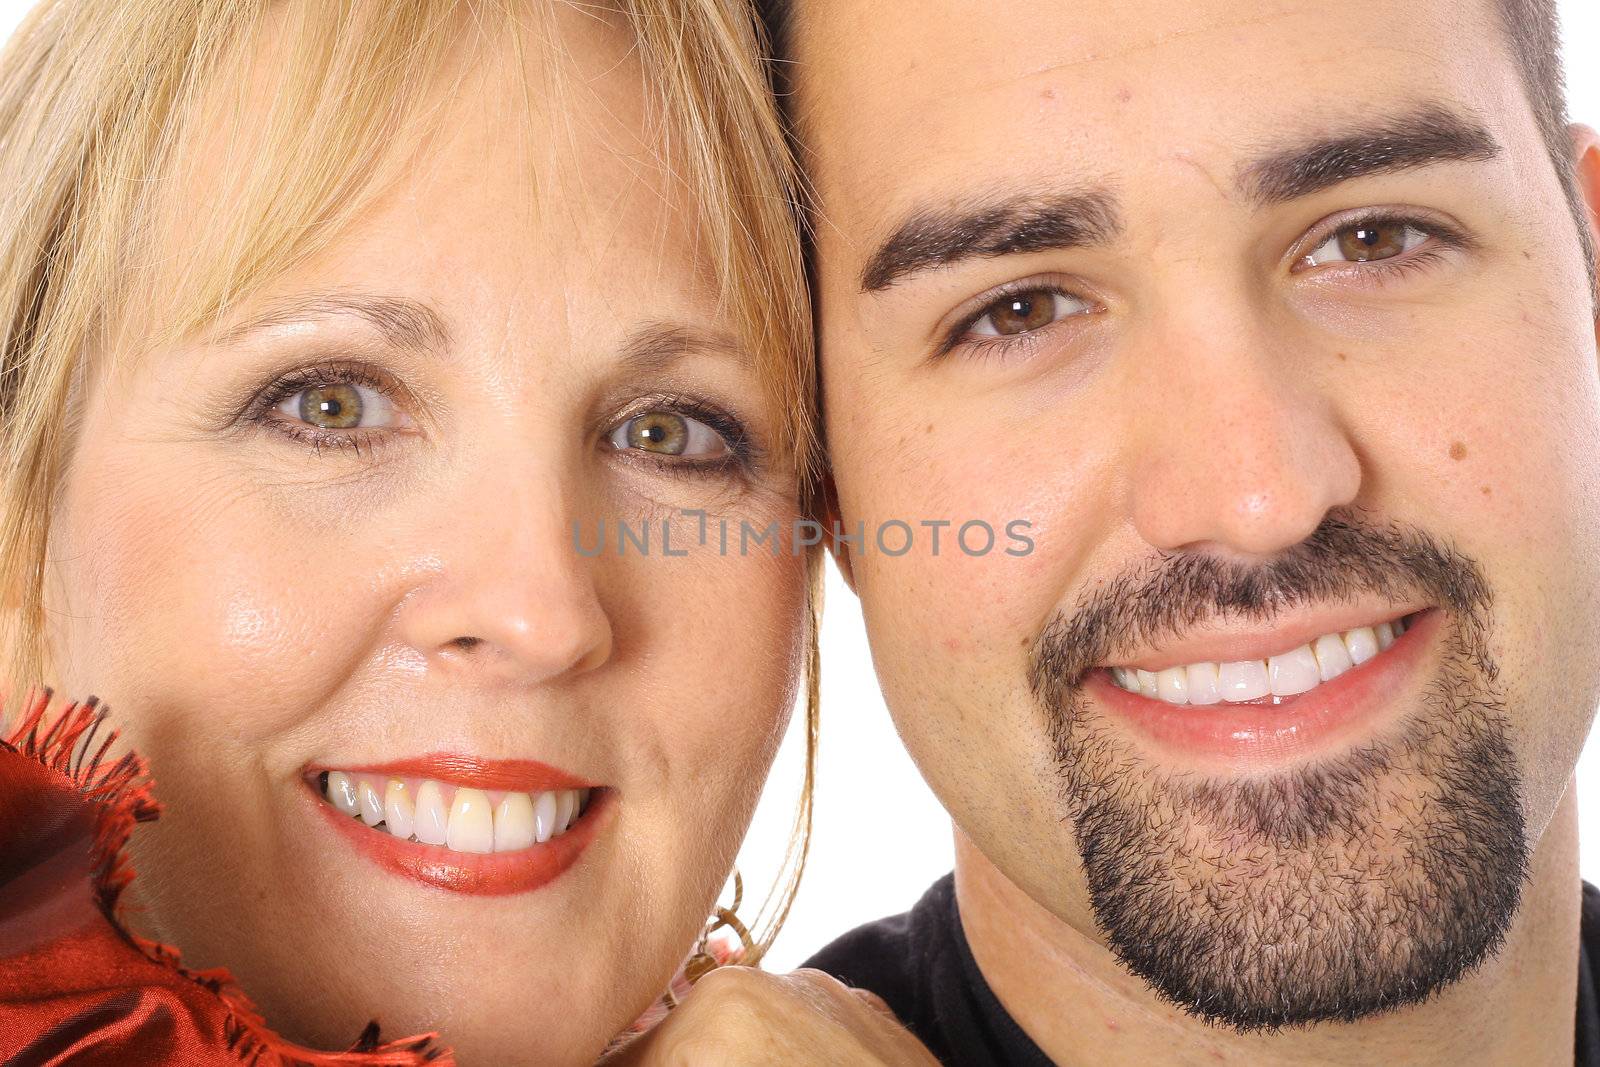 mother and son headshot